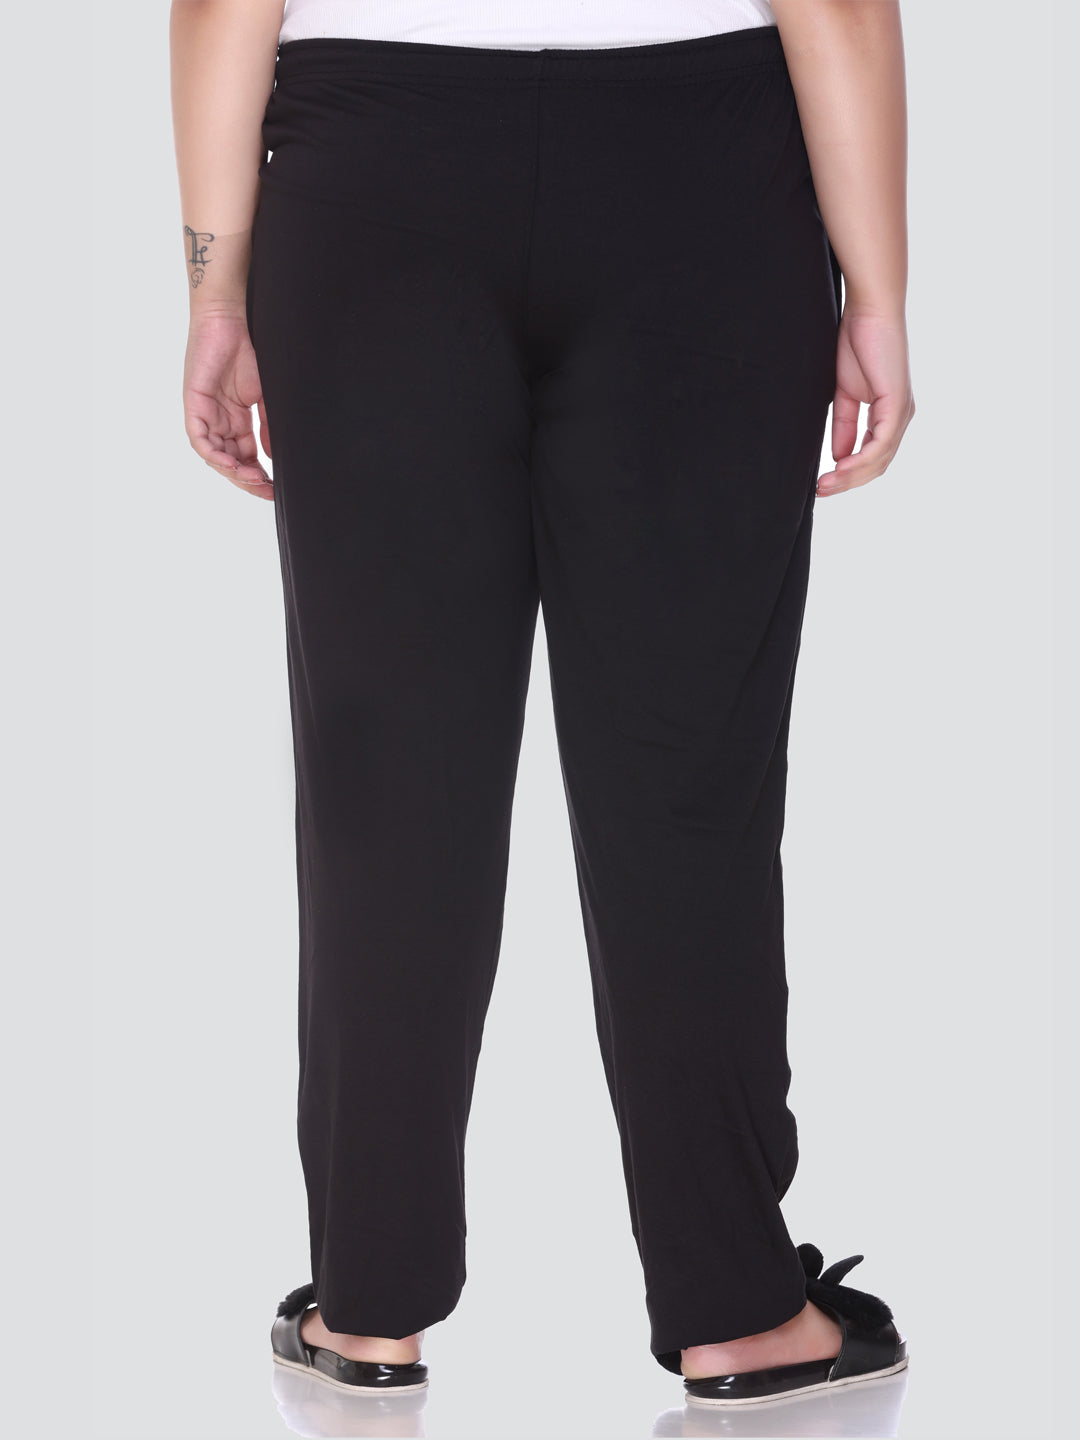 Buy a Womens Reebok Jersey Athletic Track Pants Online | TagsWeekly.com, TW2